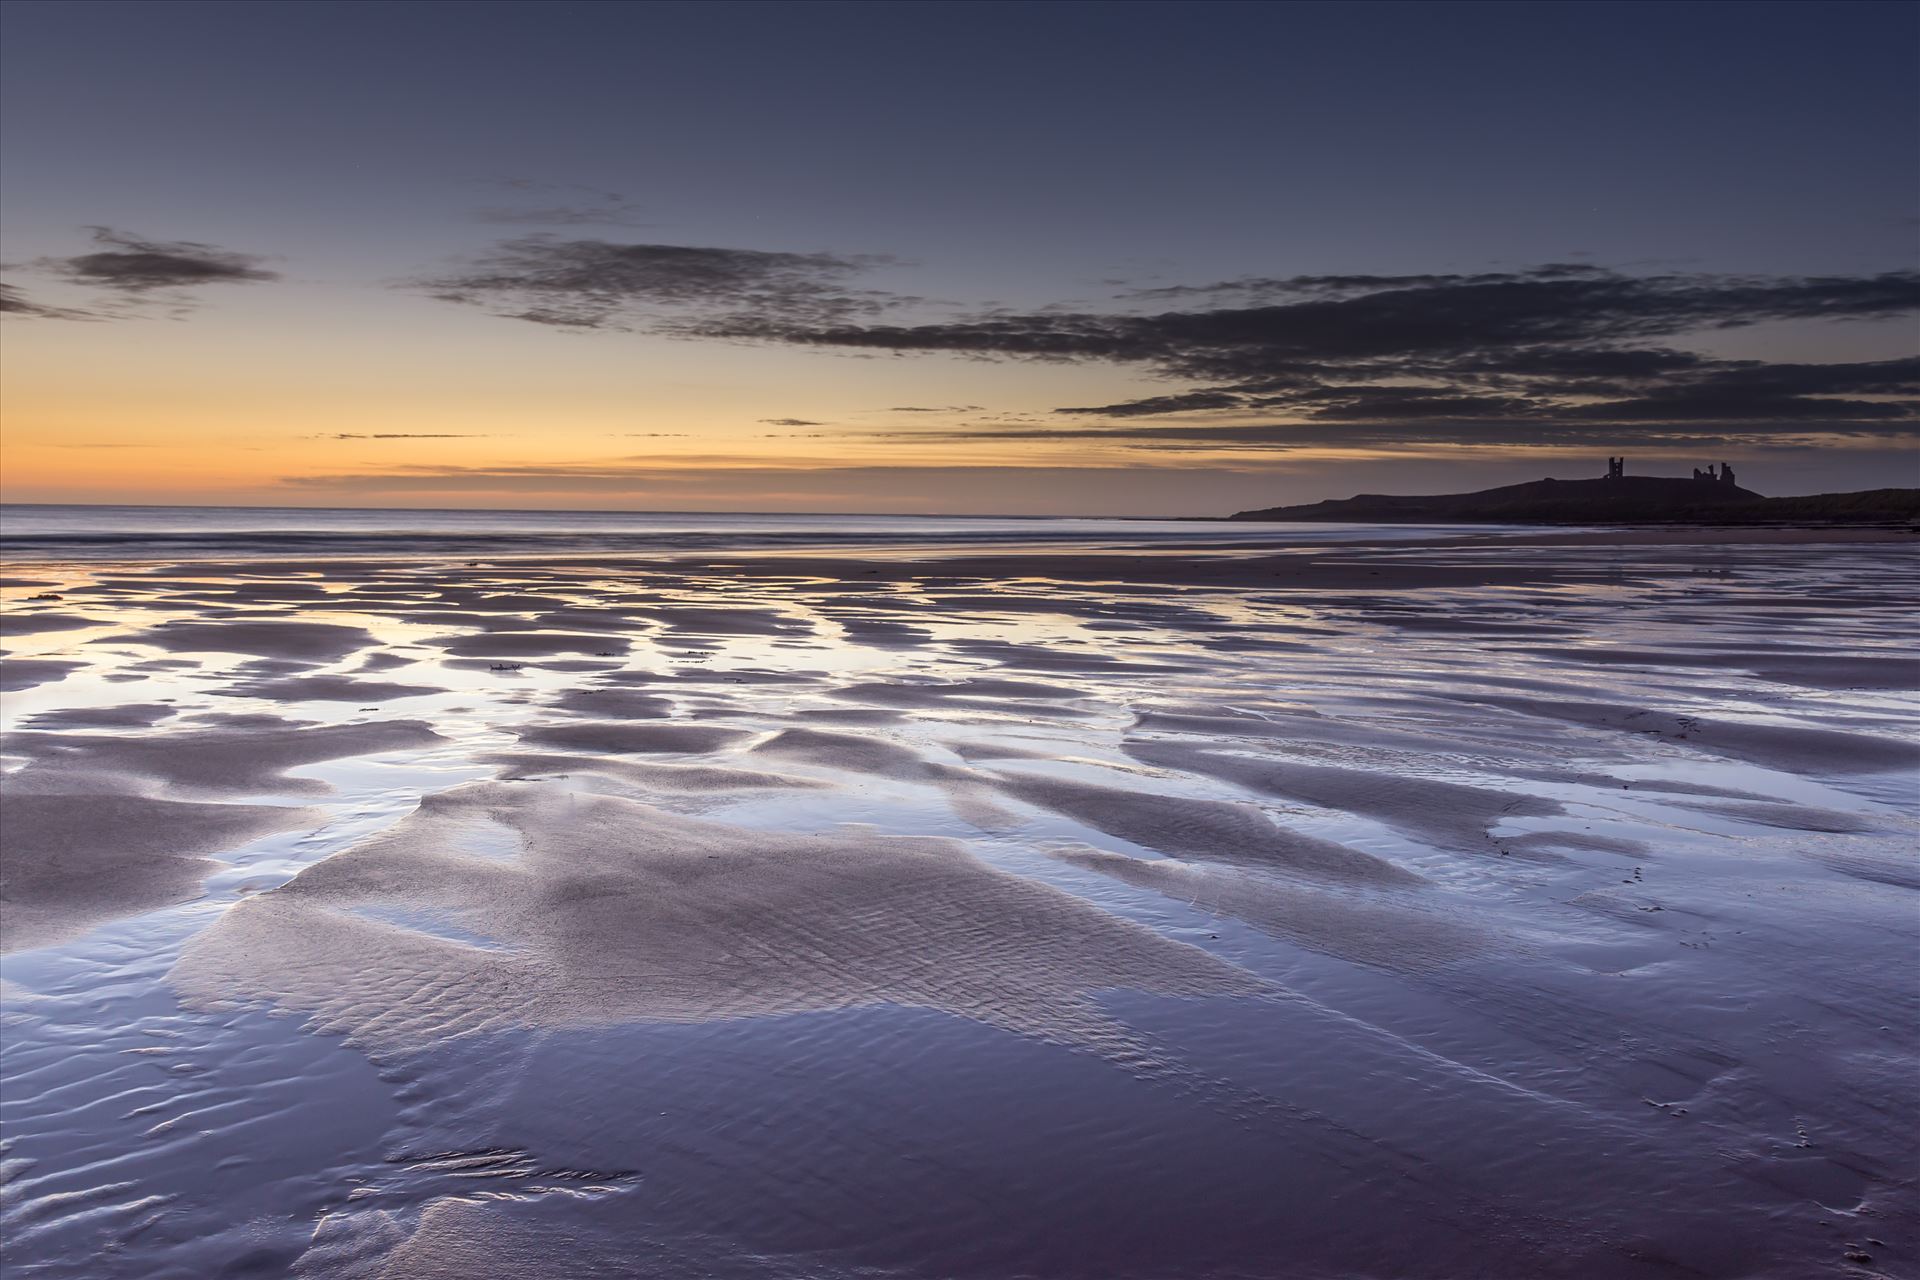 Sunrise at Embleton Bay, Northumberland Embleton Bay is a bay on the North Sea, located to the east of the village of Embleton, Northumberland, England. It lies just to the south of Newton-by-the-Sea and north of Craster by philreay